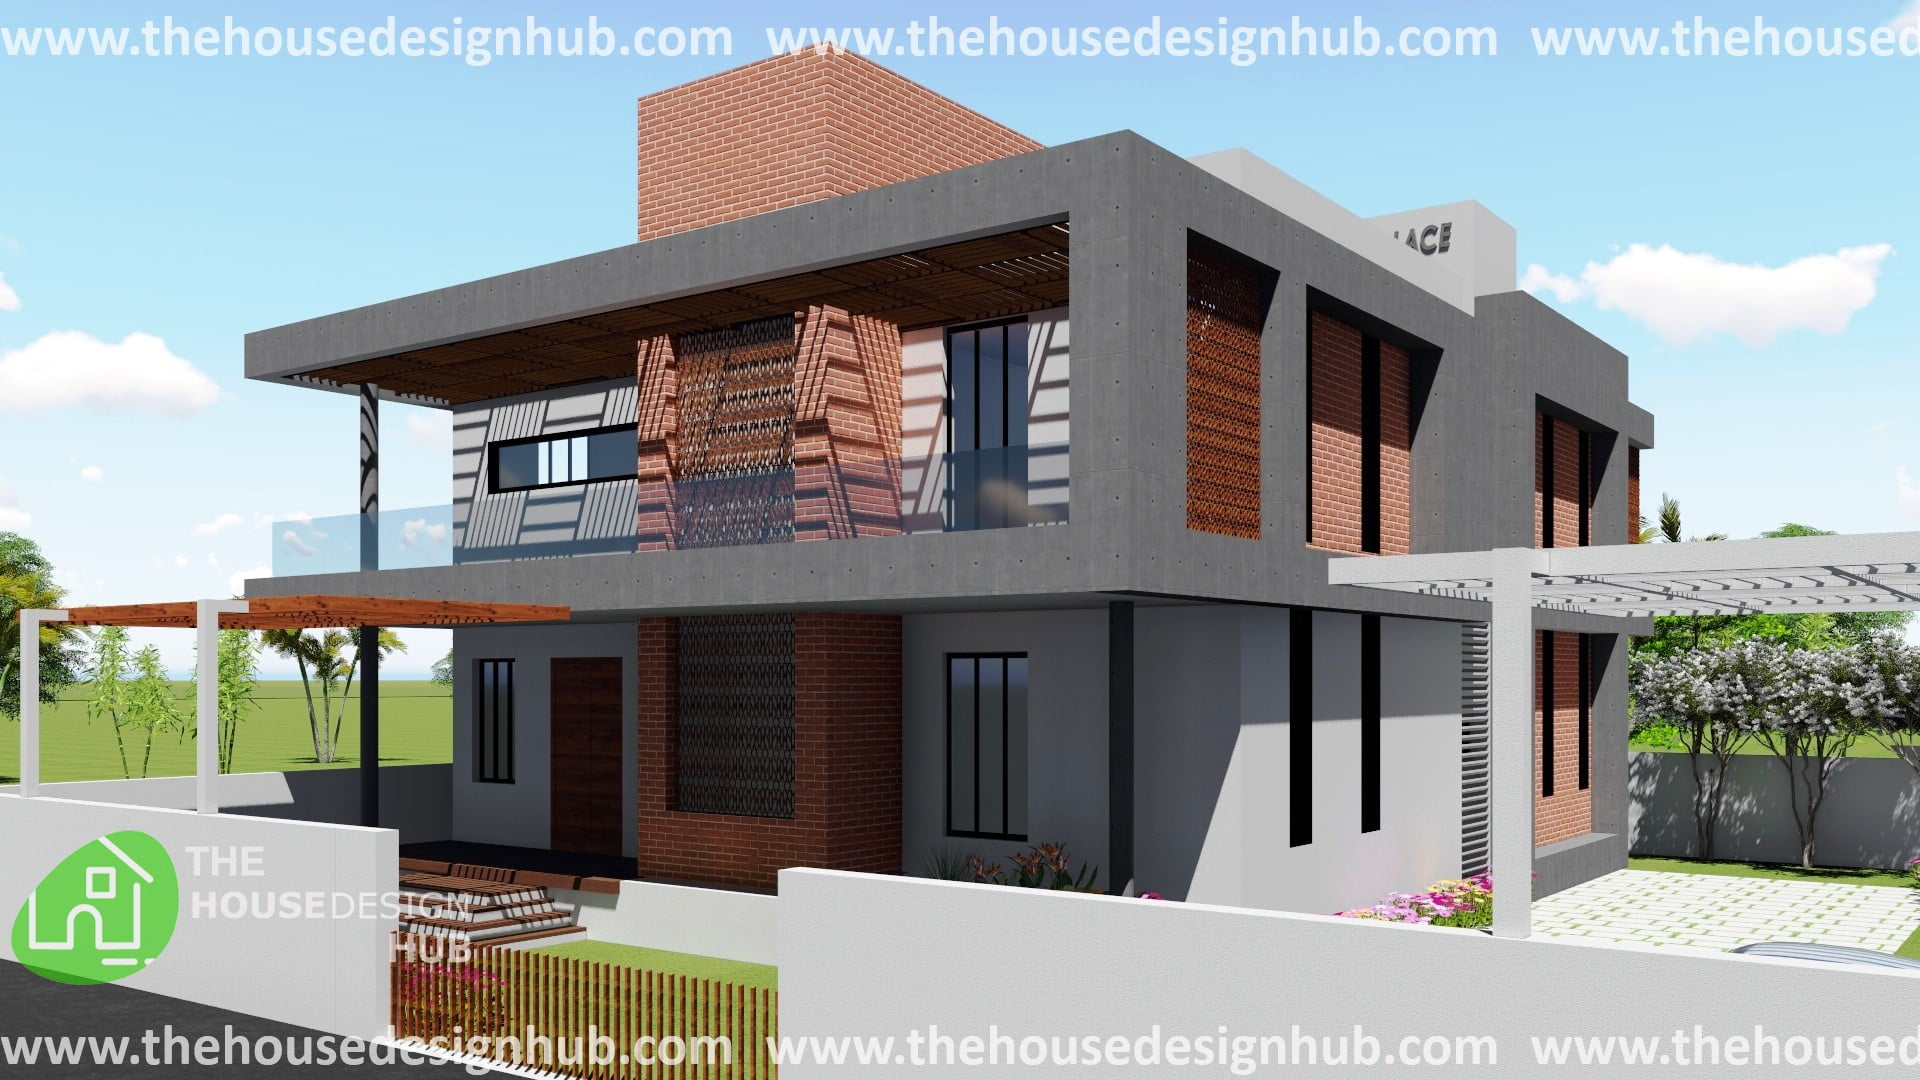 Beautiful Contemporary House Designs Of 5  The House Design Hub